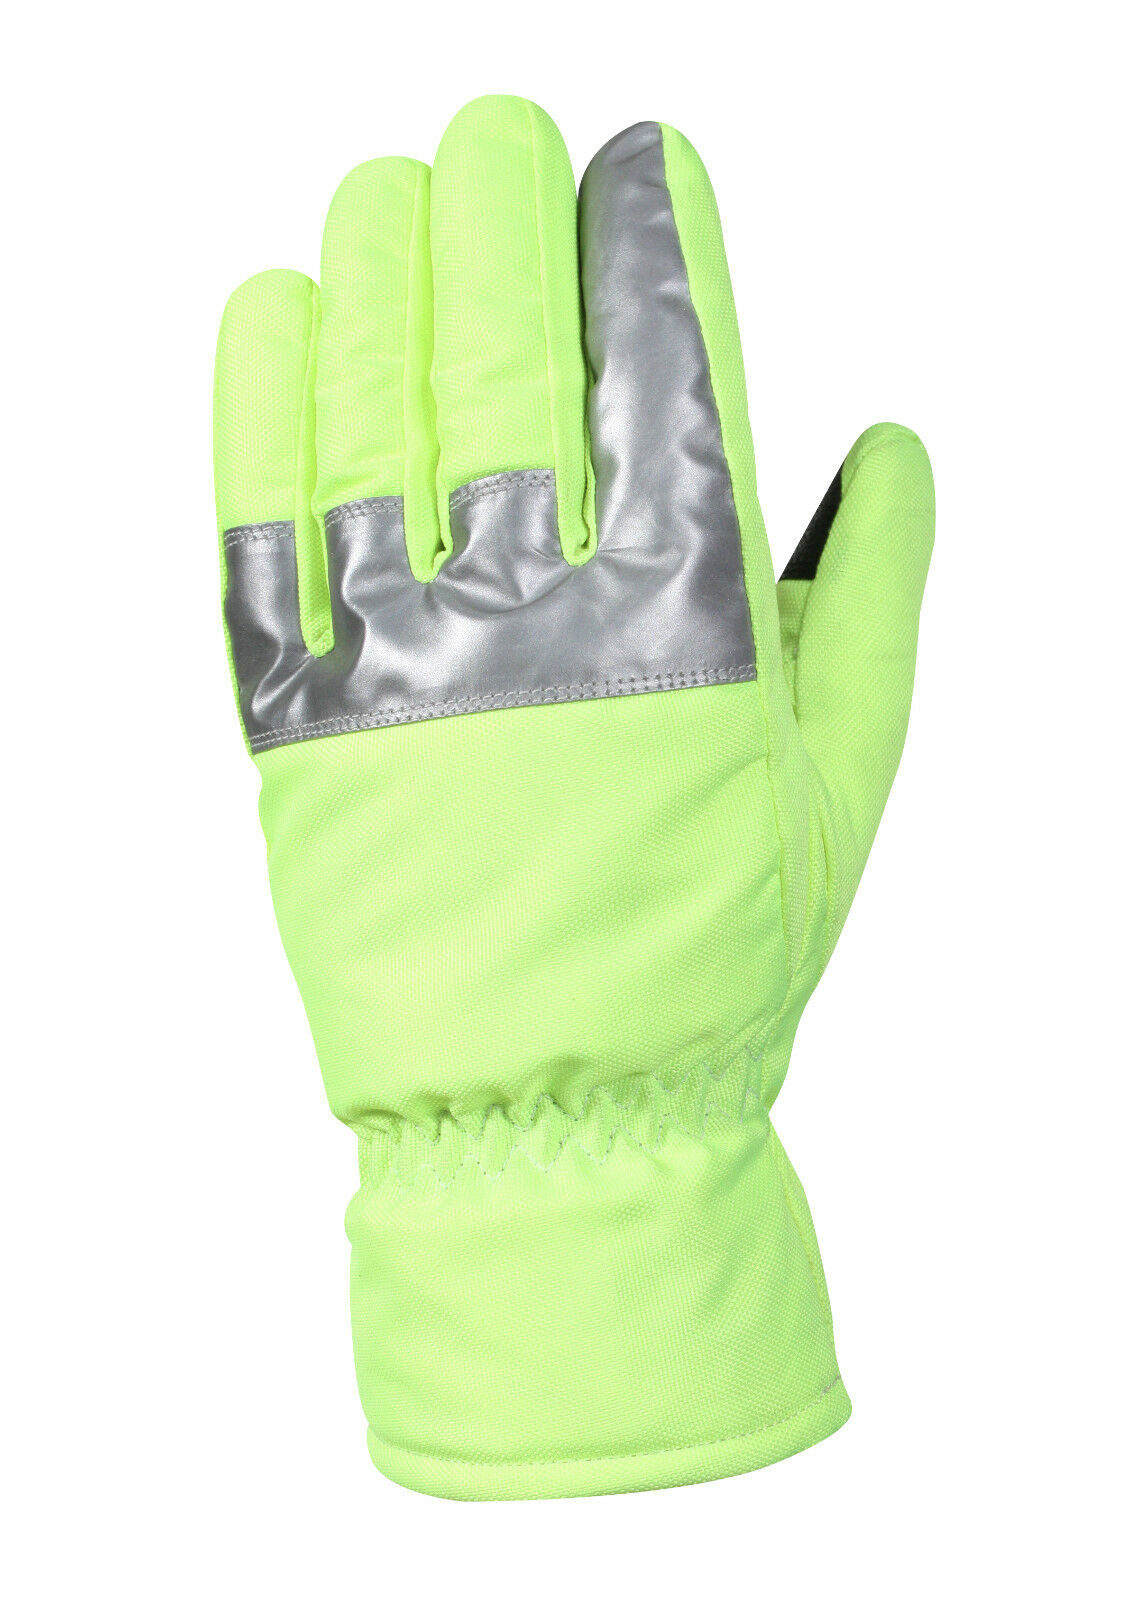 Rothco Safety Green Gloves With Reflective Tape